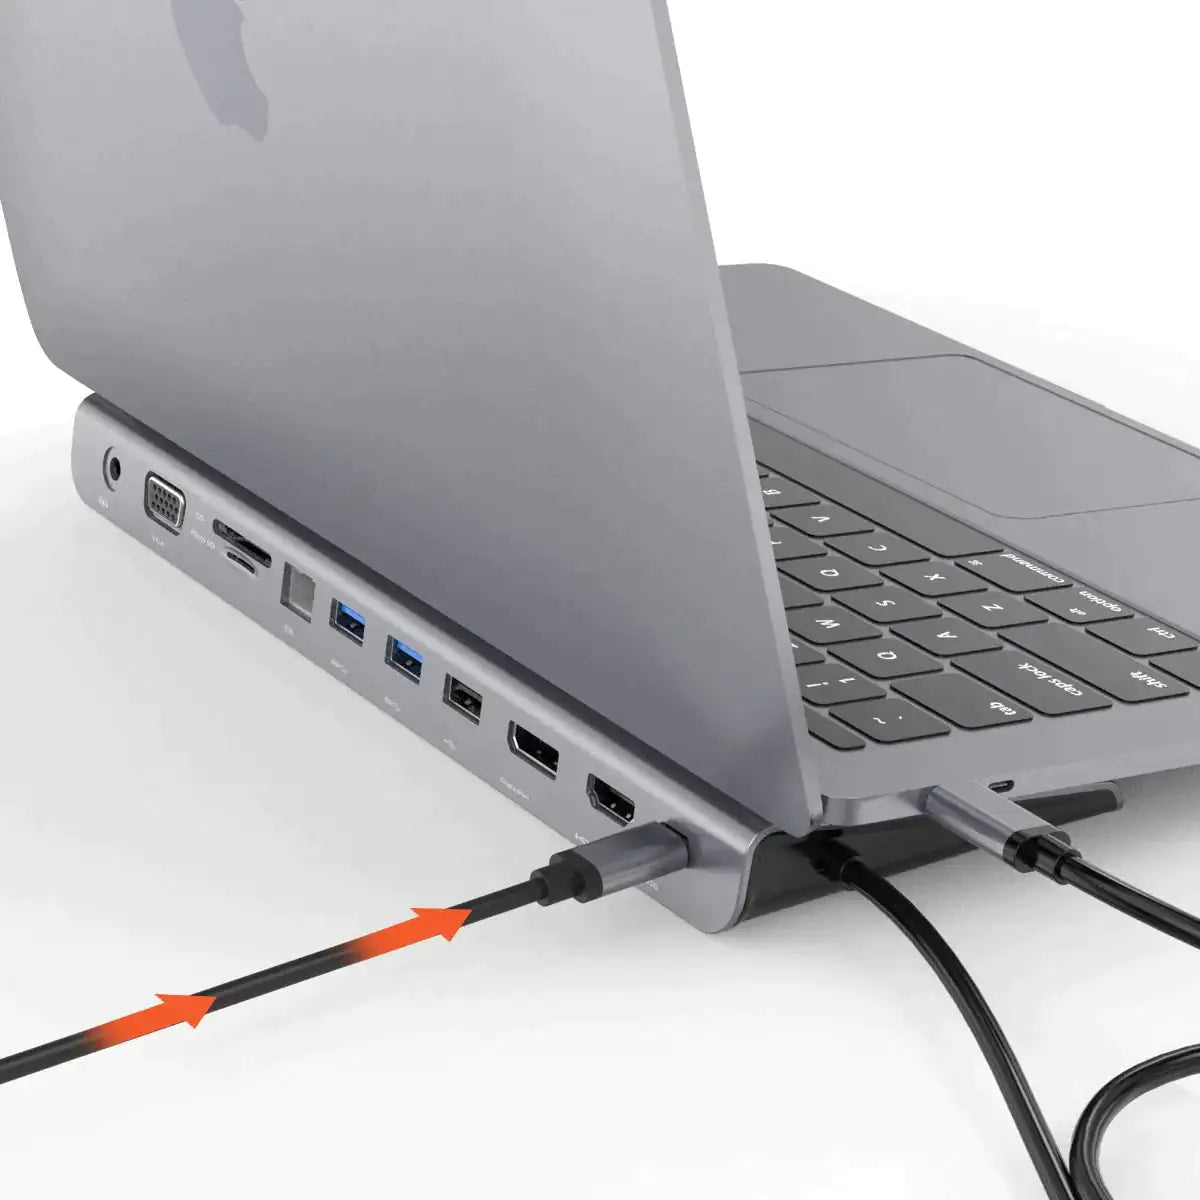 The Ultimate 11-Port Laptop Docking Station for a Clean and Efficient Workspace"